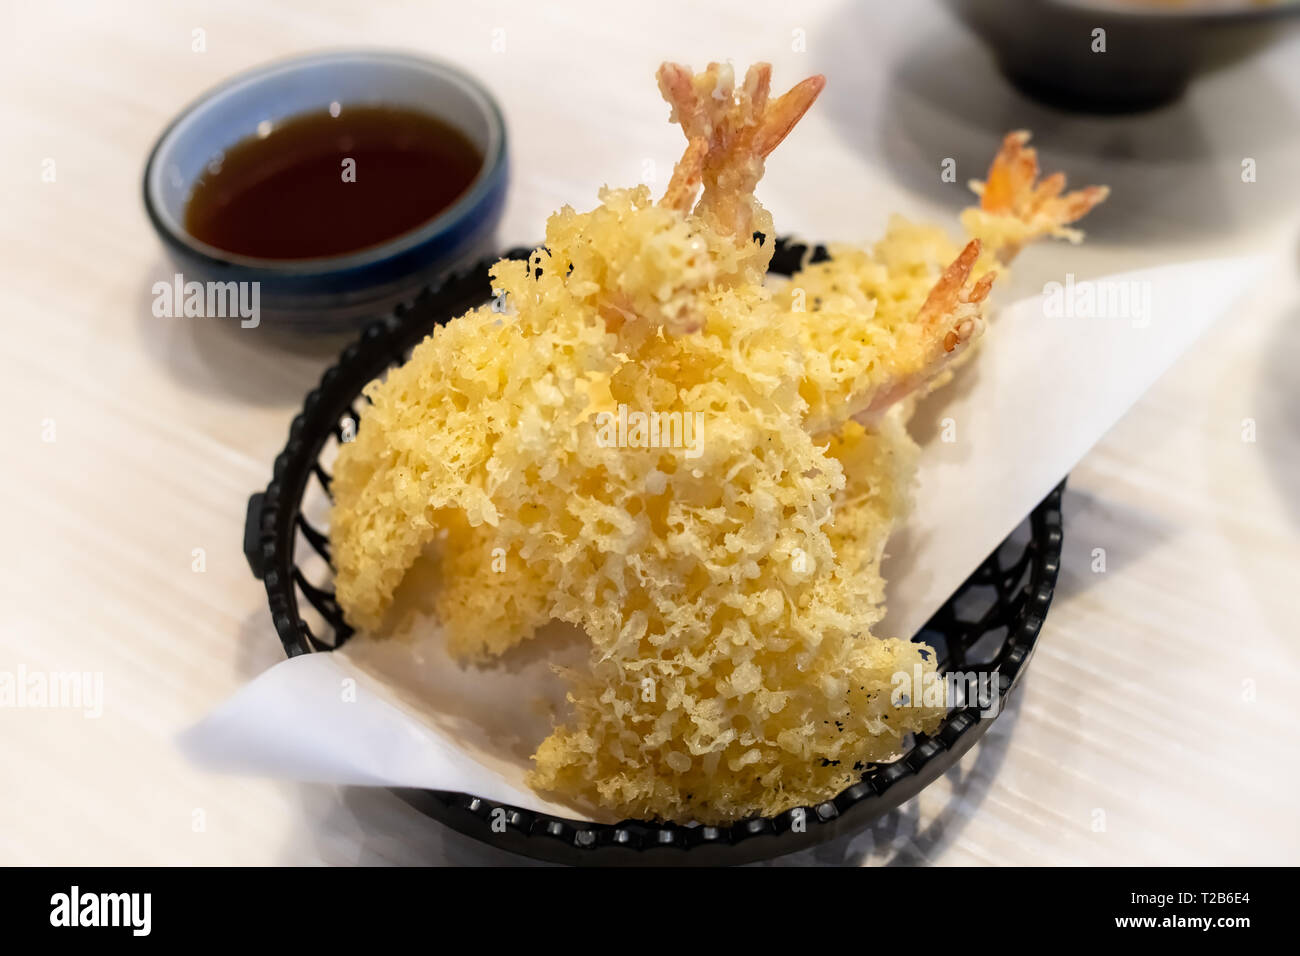 Shrimps tempura or deepfried shrimp with flour in Japanese style food with indoor low lighting. Stock Photo